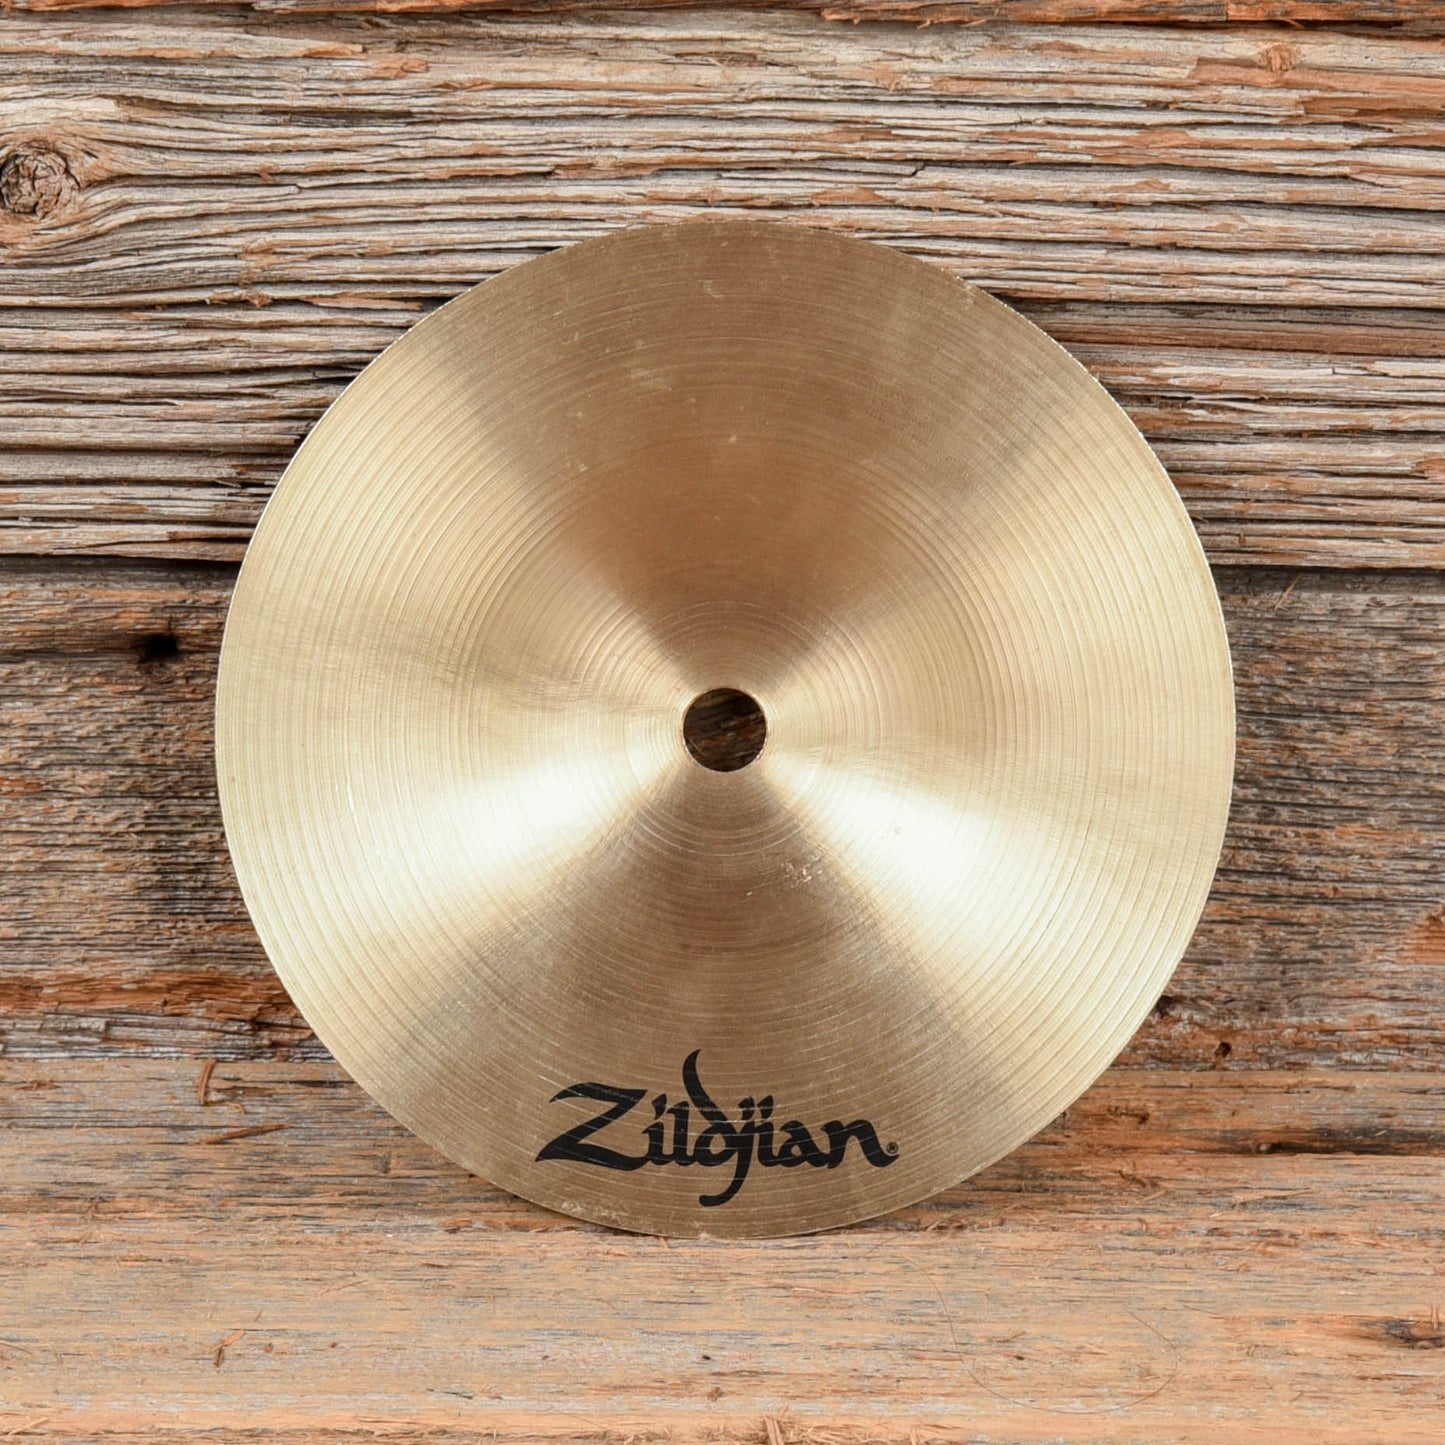 Zildjian 6" A Splash Cymbal USED Drums and Percussion